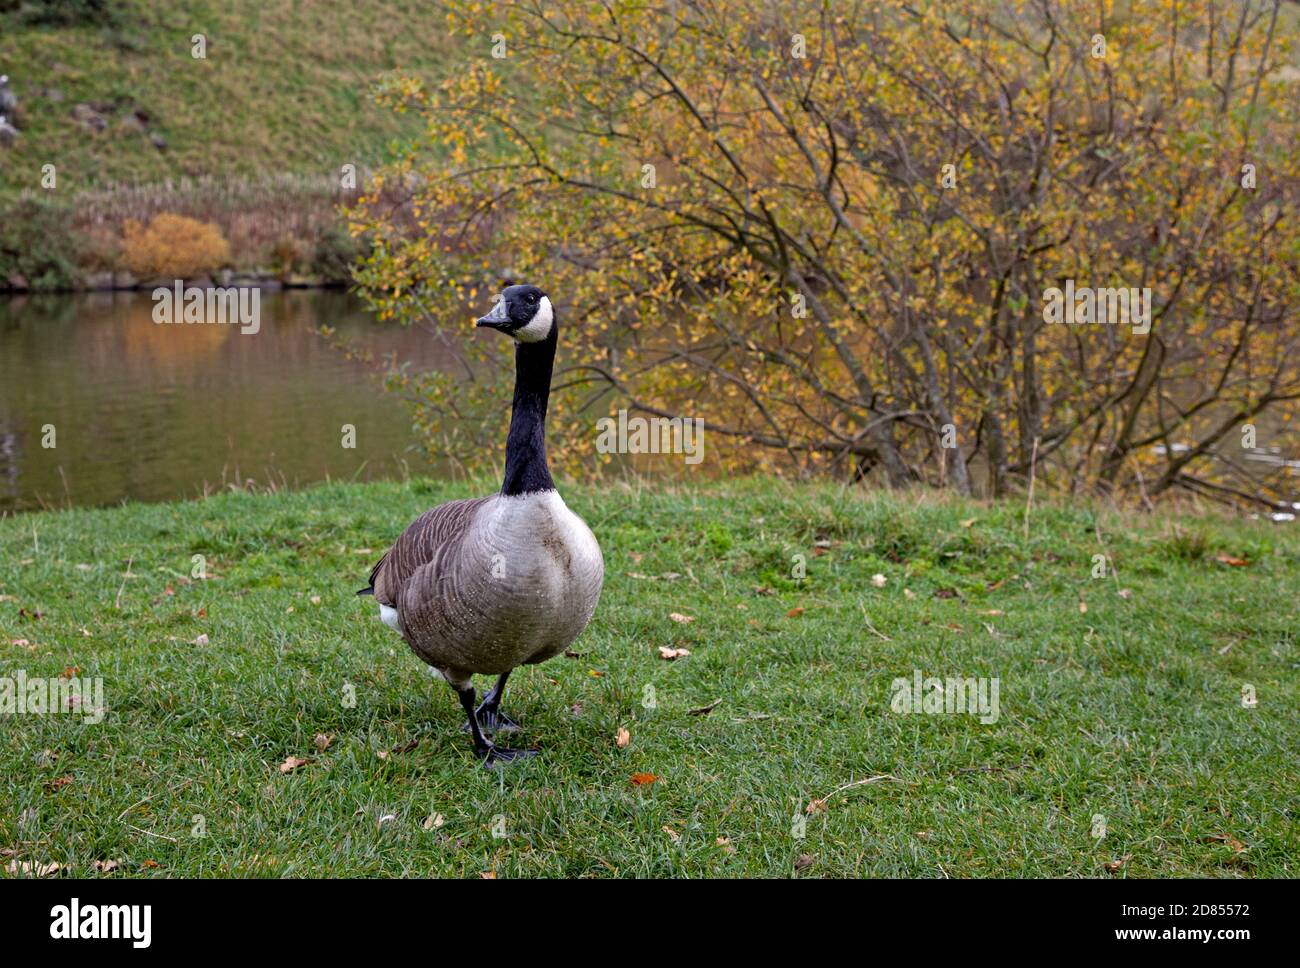 Holyrood Park, Edinburgh, Scotland, UK. 27 October 2020. Temperature of 8 degrees centigrade and leaden grey skies before heavy rain later at the park in the city centre. Avian activity around the loch. Pictured: Canada Goose at the lochside with autumn foliage in background. Stock Photo